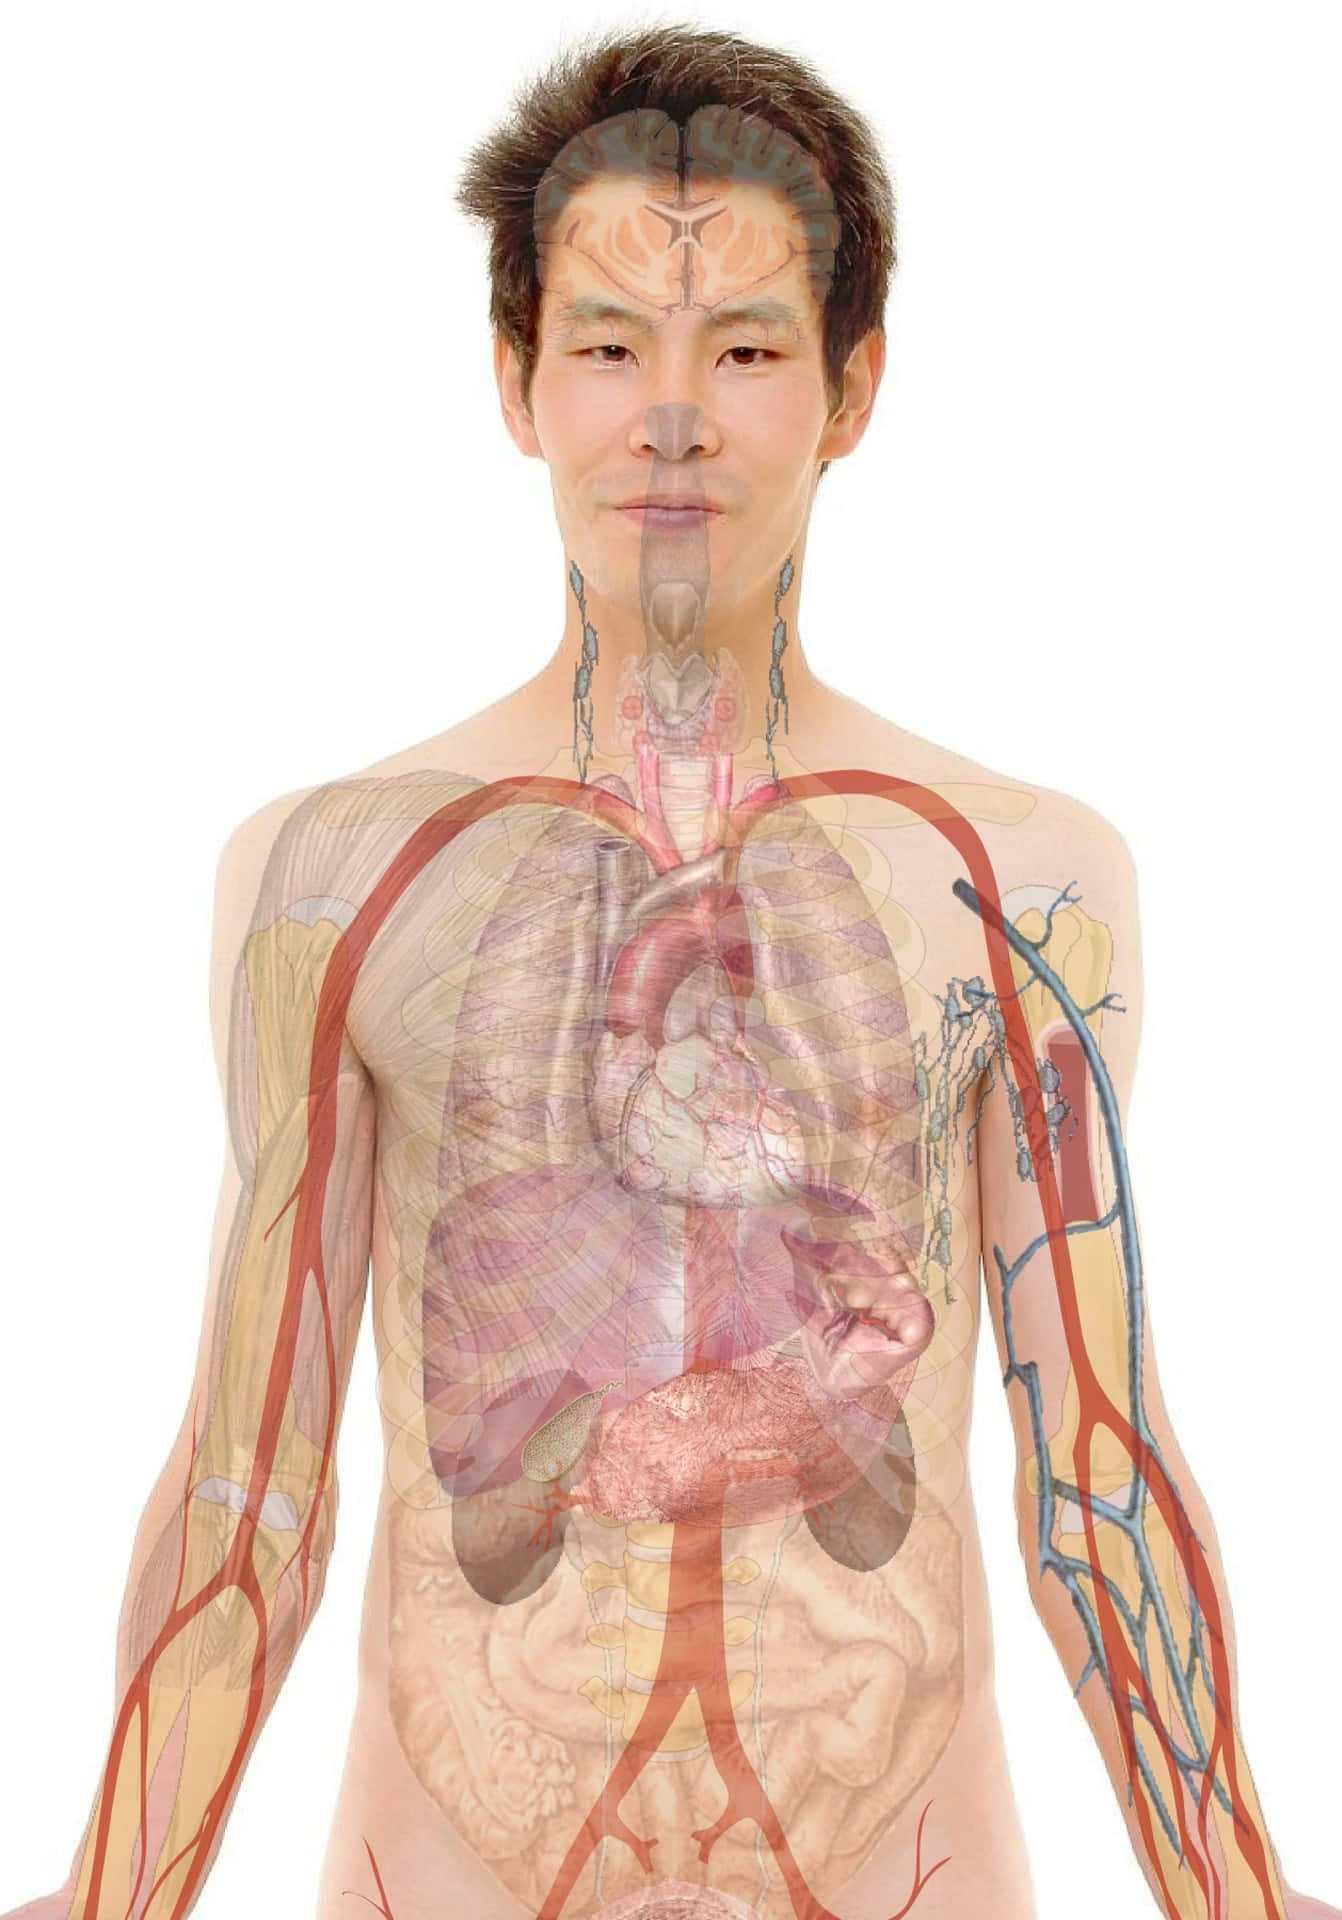 A Man's Body With A Blood Vessel And Organs